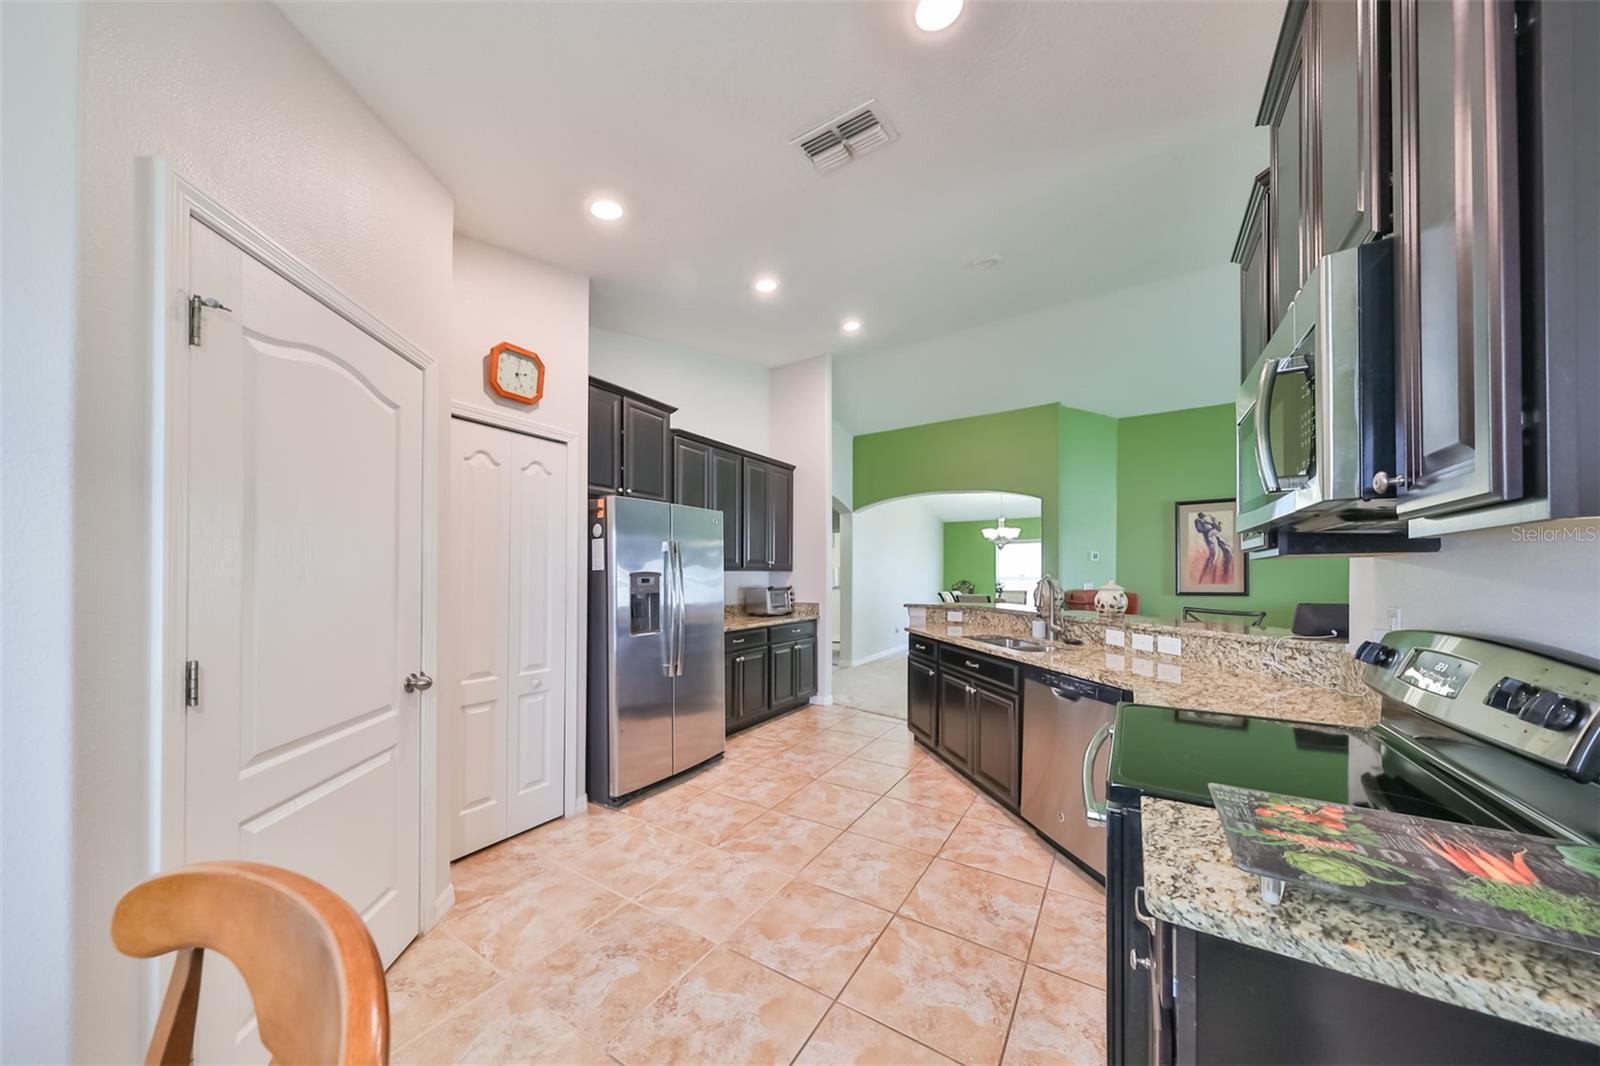 3.2 Gourmet kitchen, stainless steel appliances with tile floor